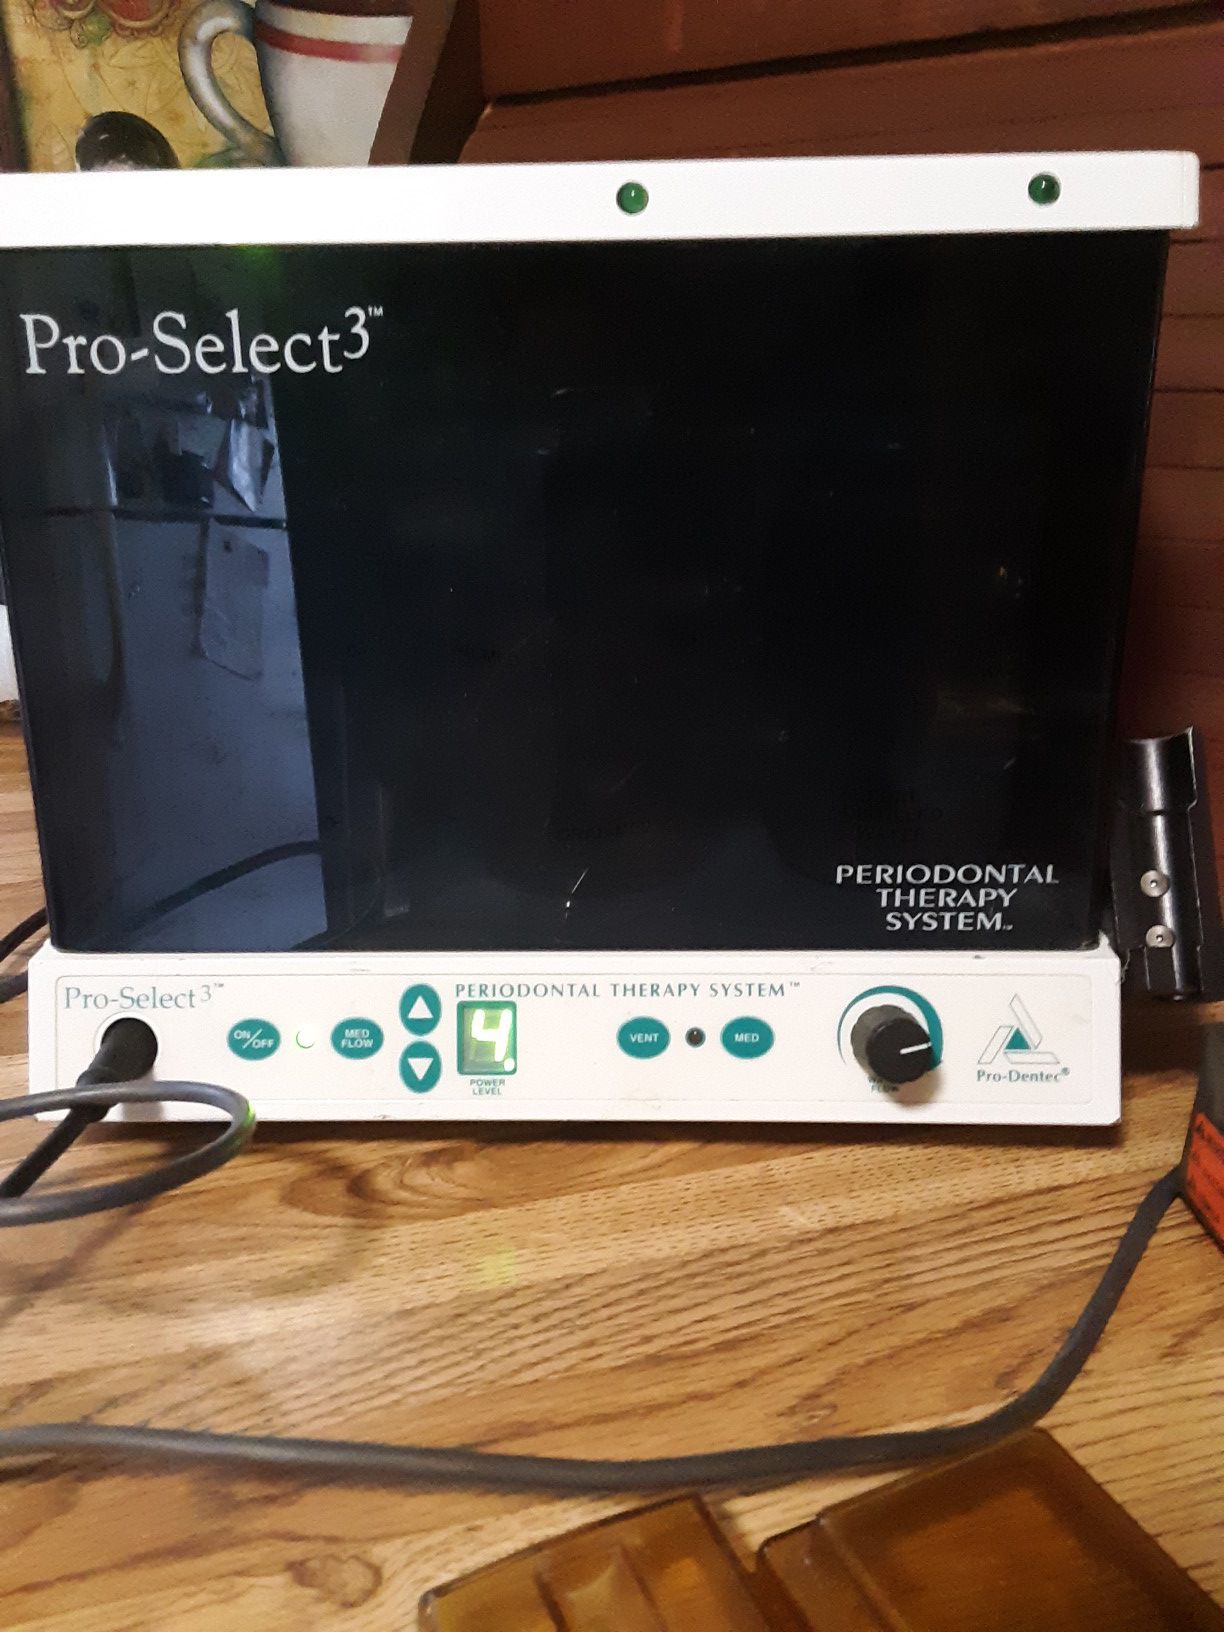 Pro select 3 Periodontal Therapy system